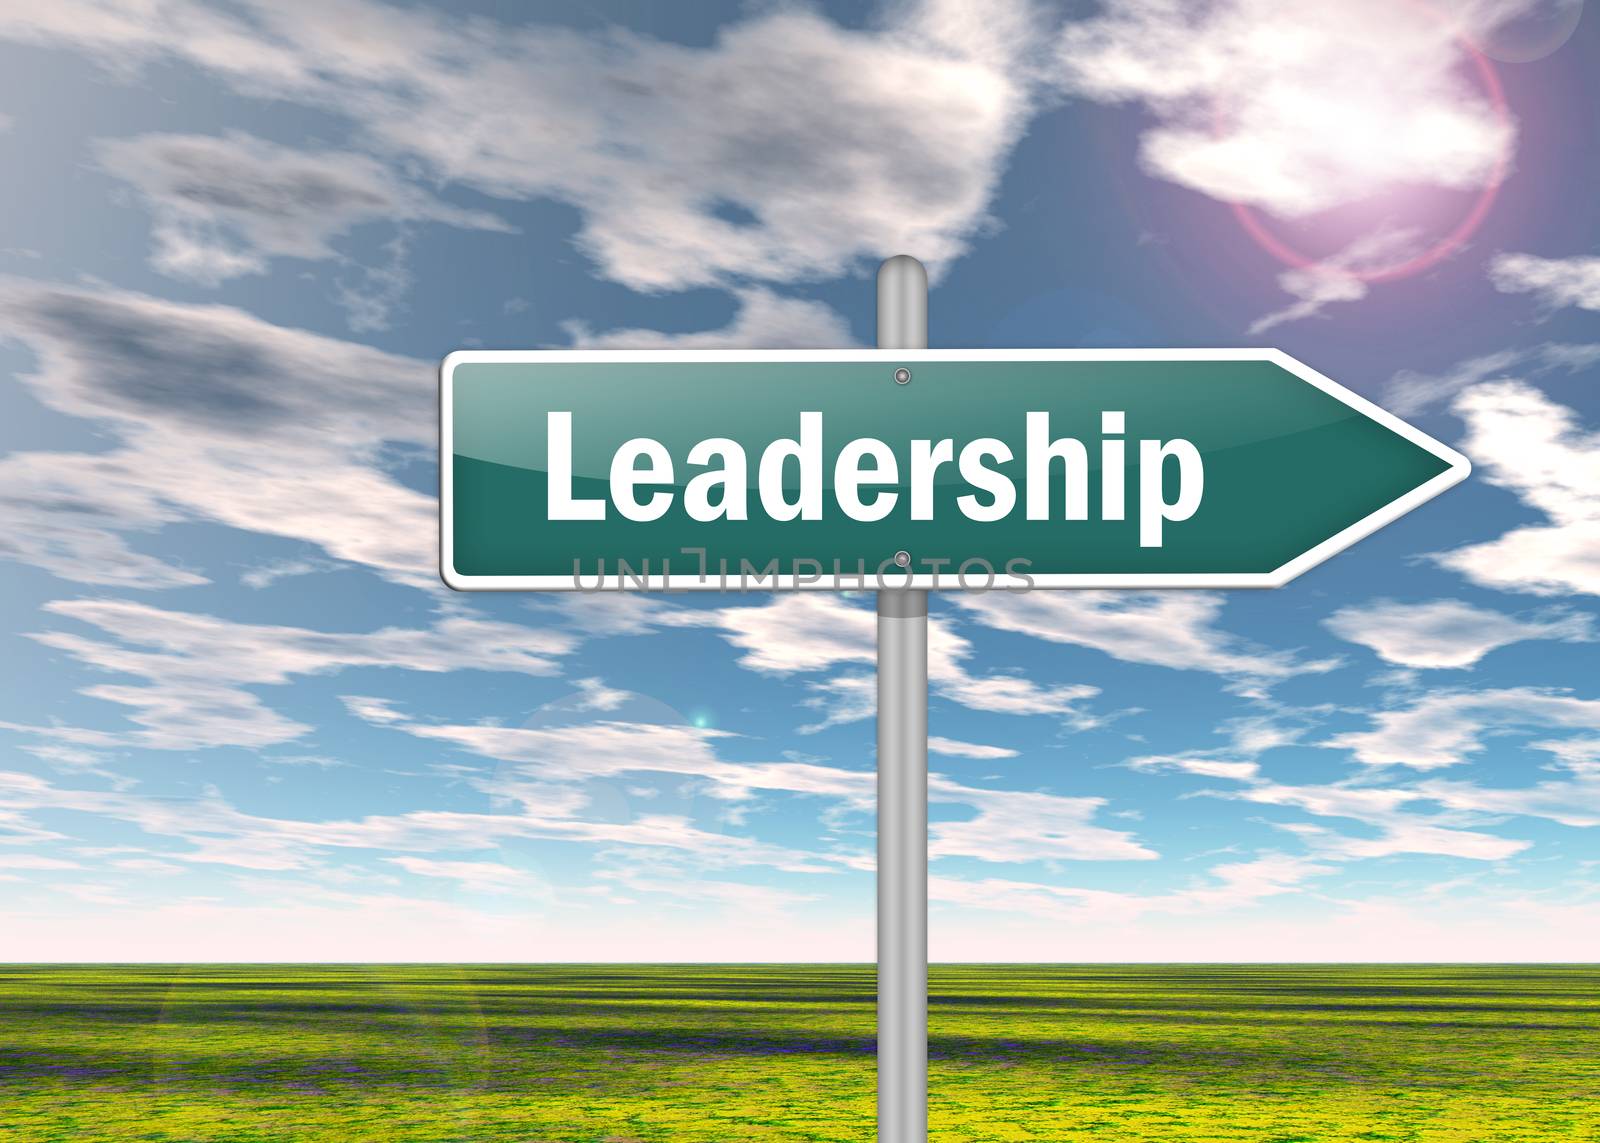 Signpost with Leadership wording